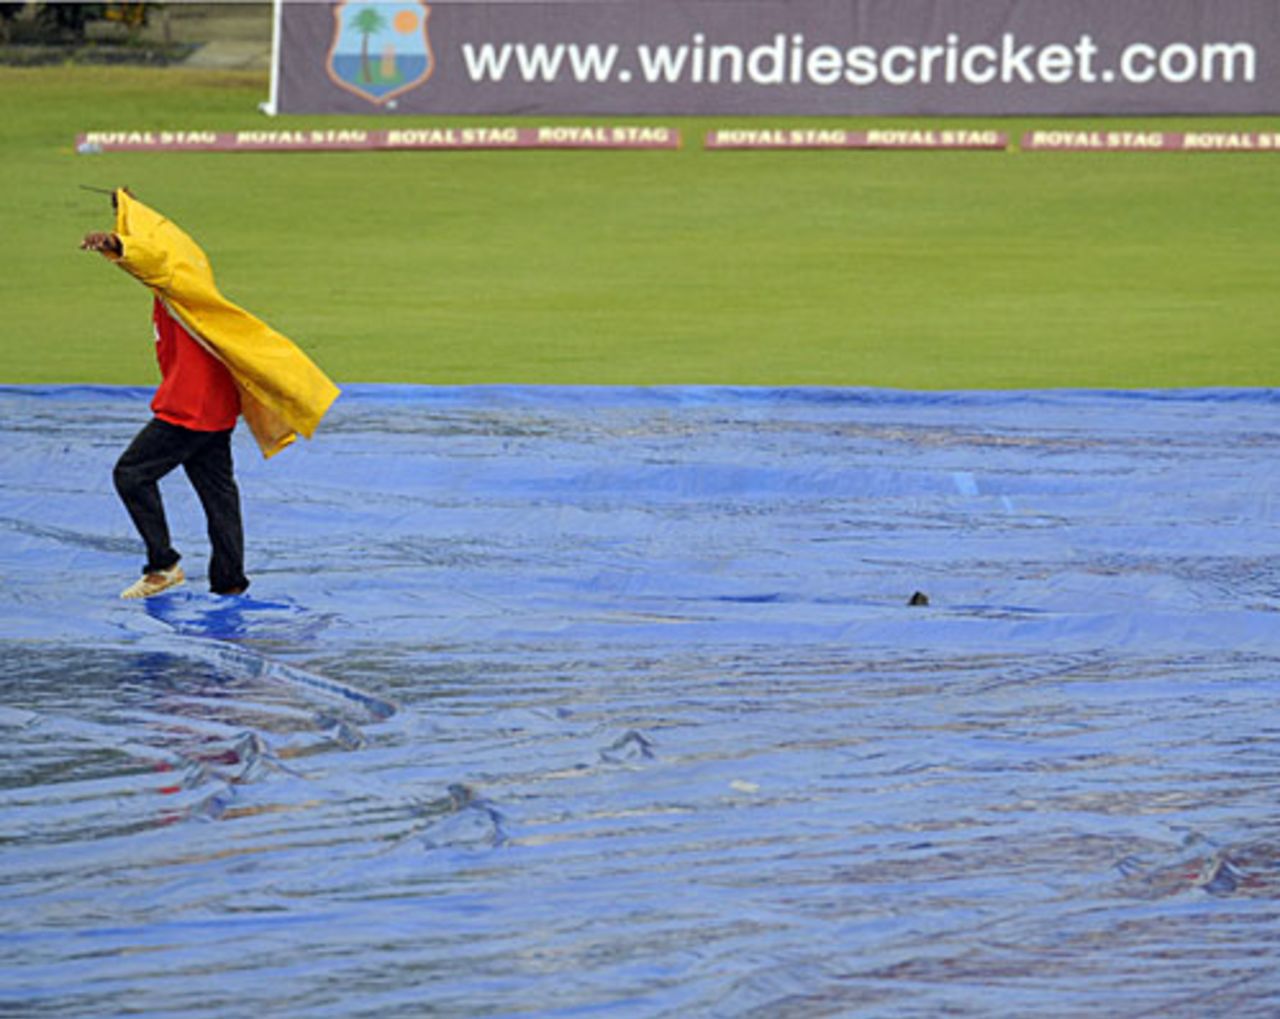 The covers are laid as rain delays the start, West Indies v India, 3rd ODI, St Lucia, July 3, 2009